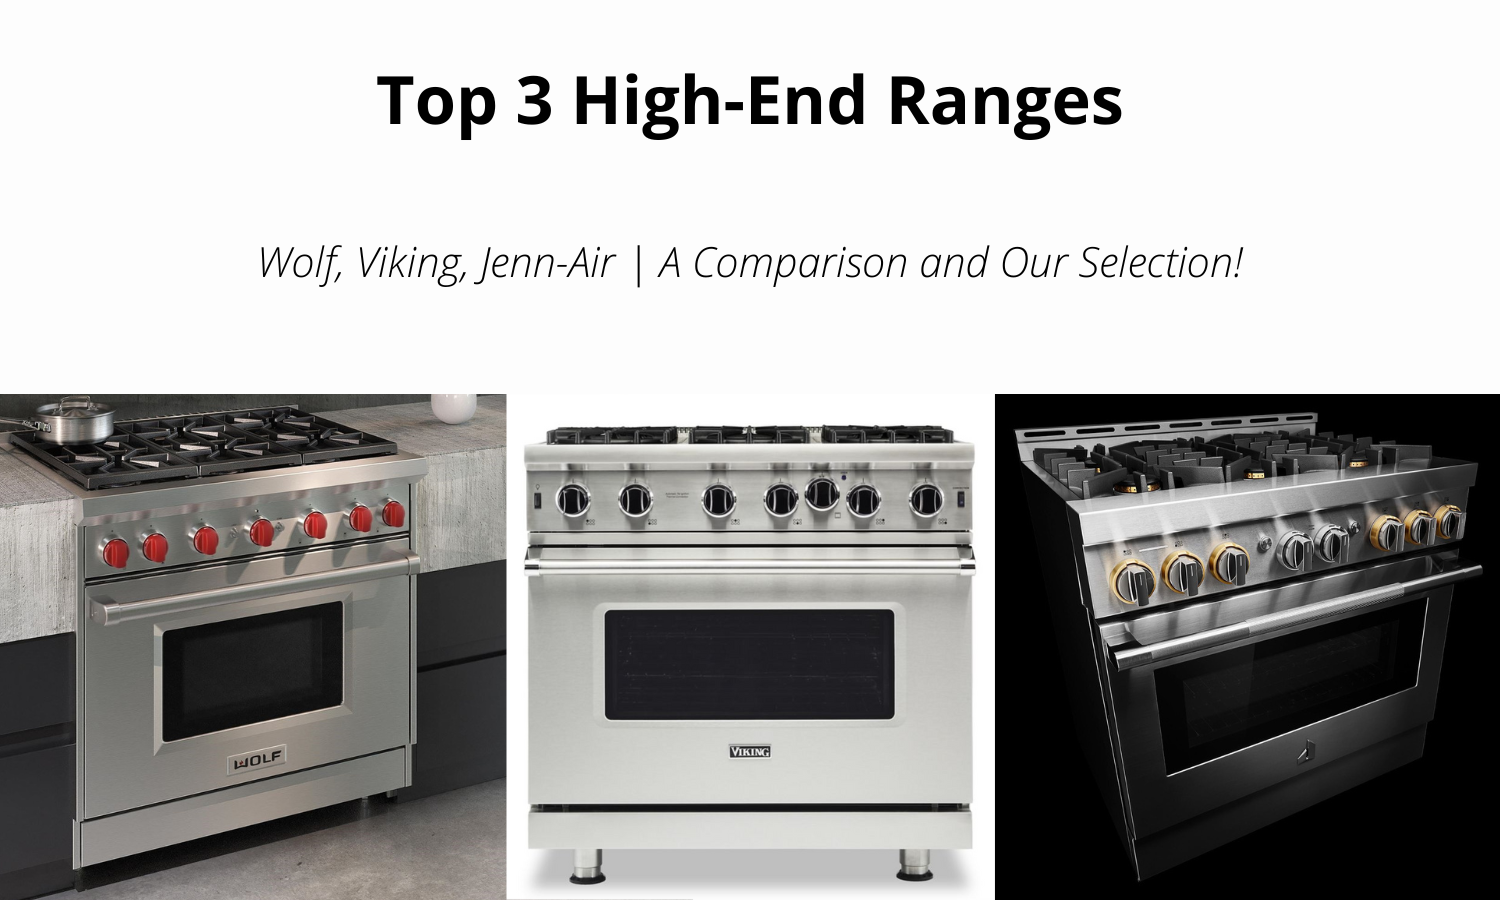 Comparing High-End Ranges - Viking vs. Wolf